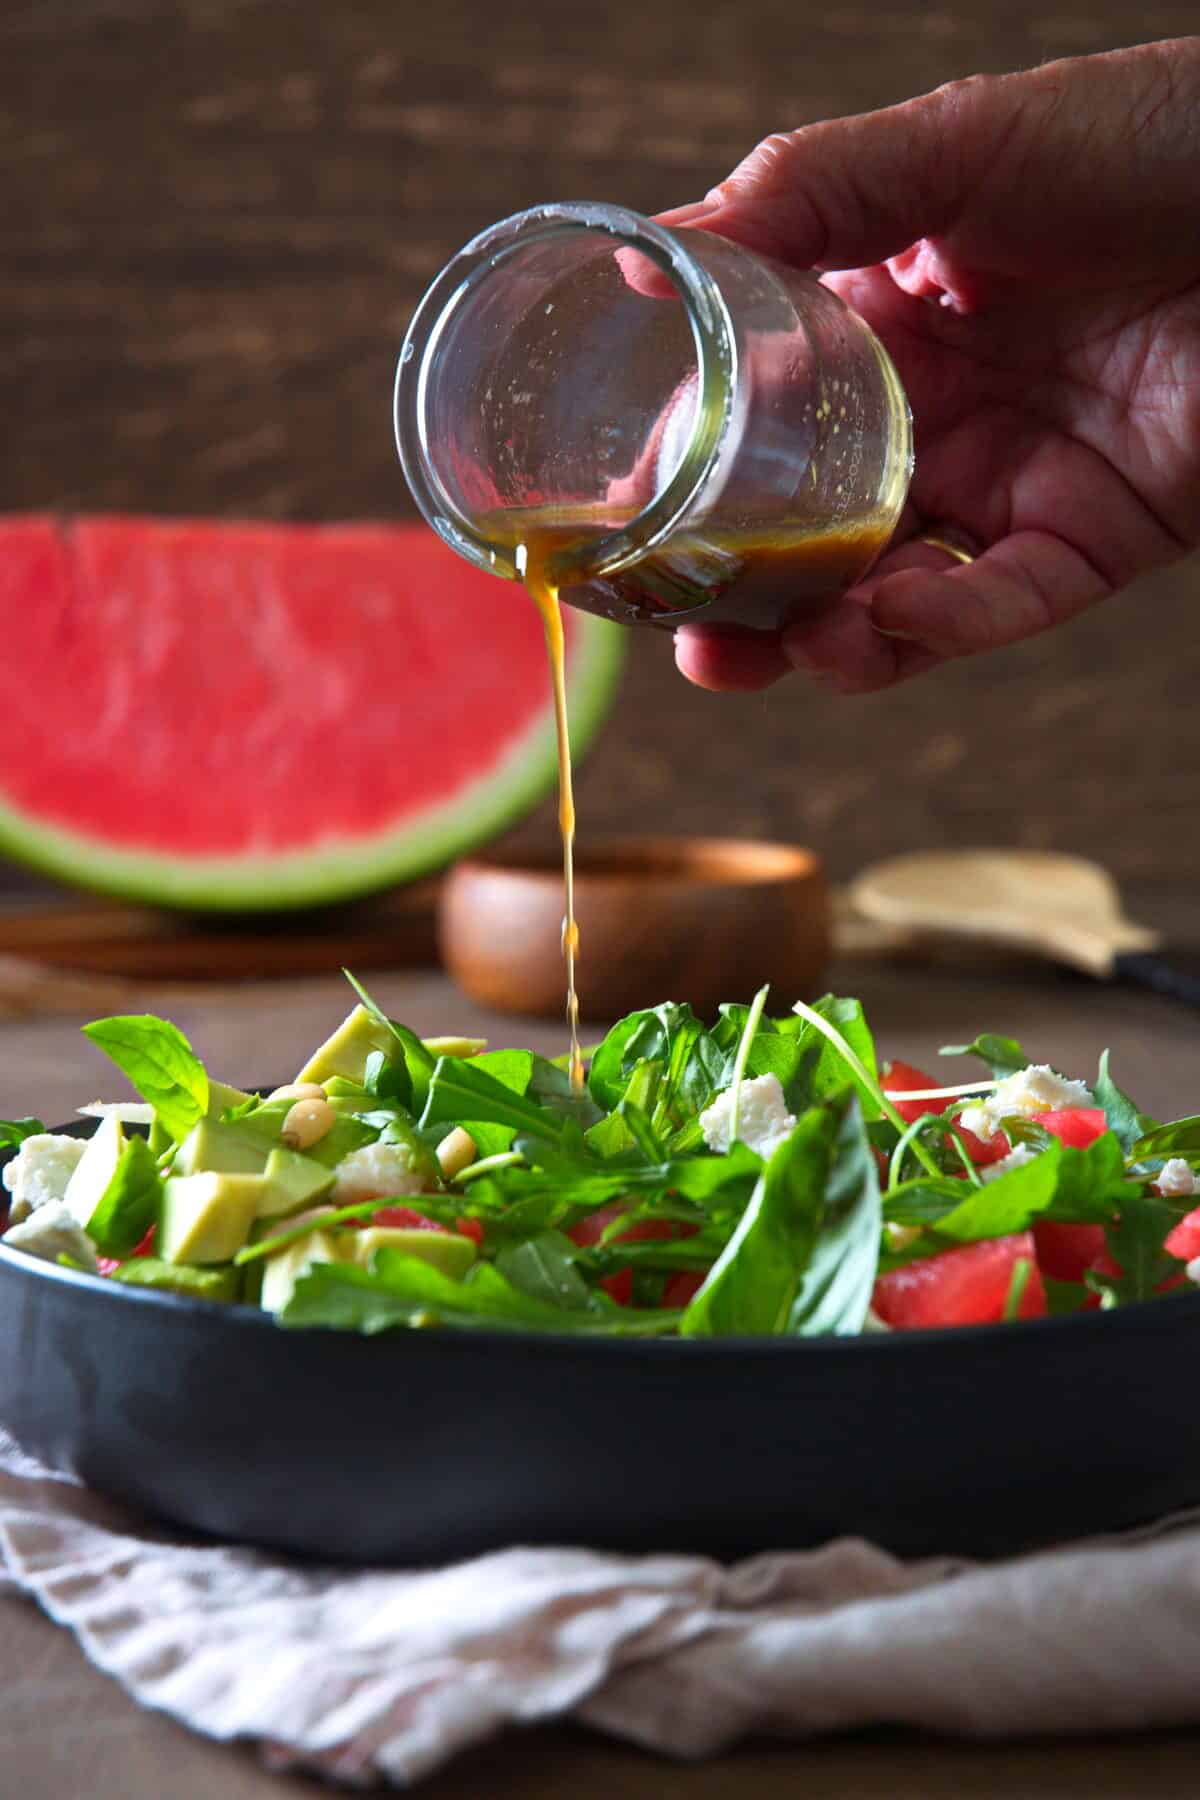 Watermelon salad in a black salad bowl with vinaigrette drizzling over, front view.